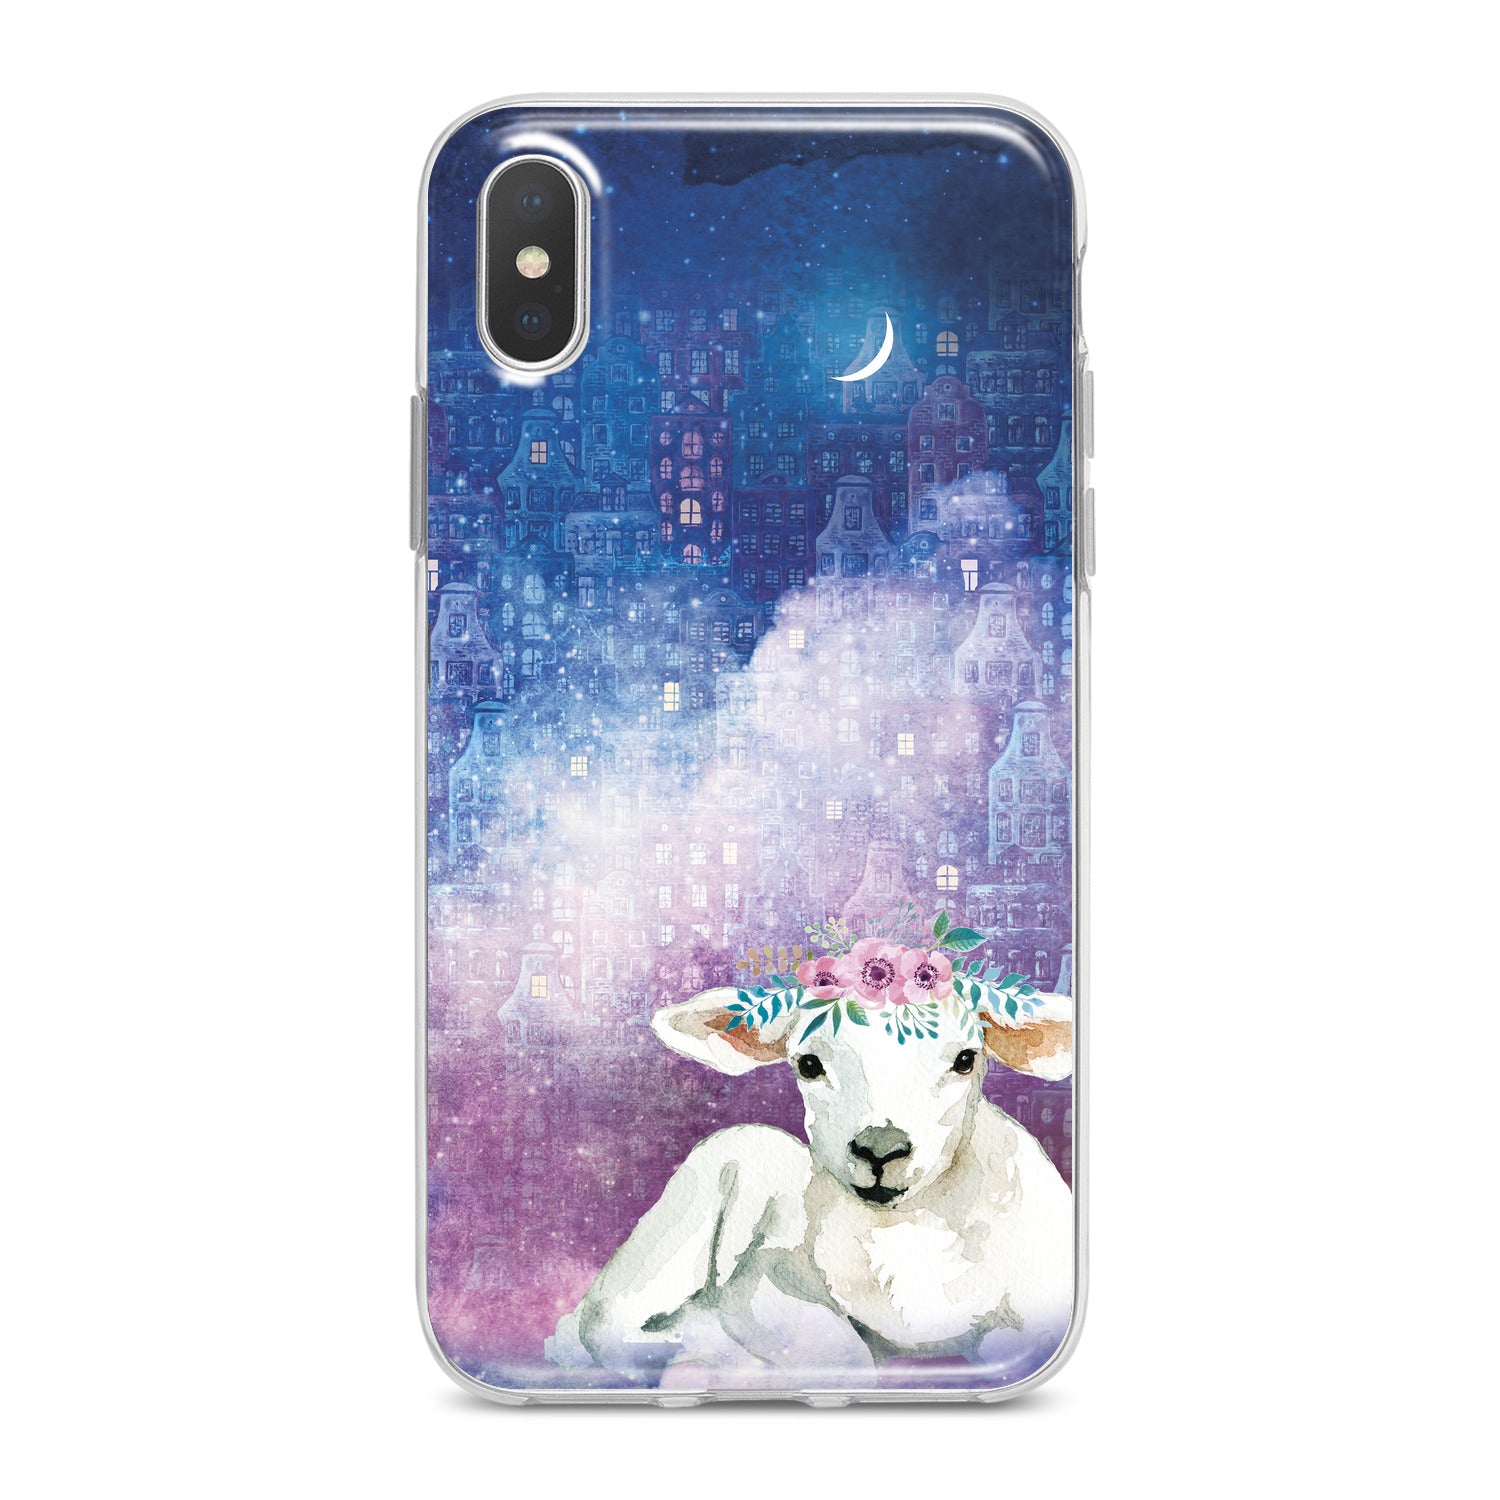 Lex Altern Adorable Goatling Phone Case for your iPhone & Android phone.